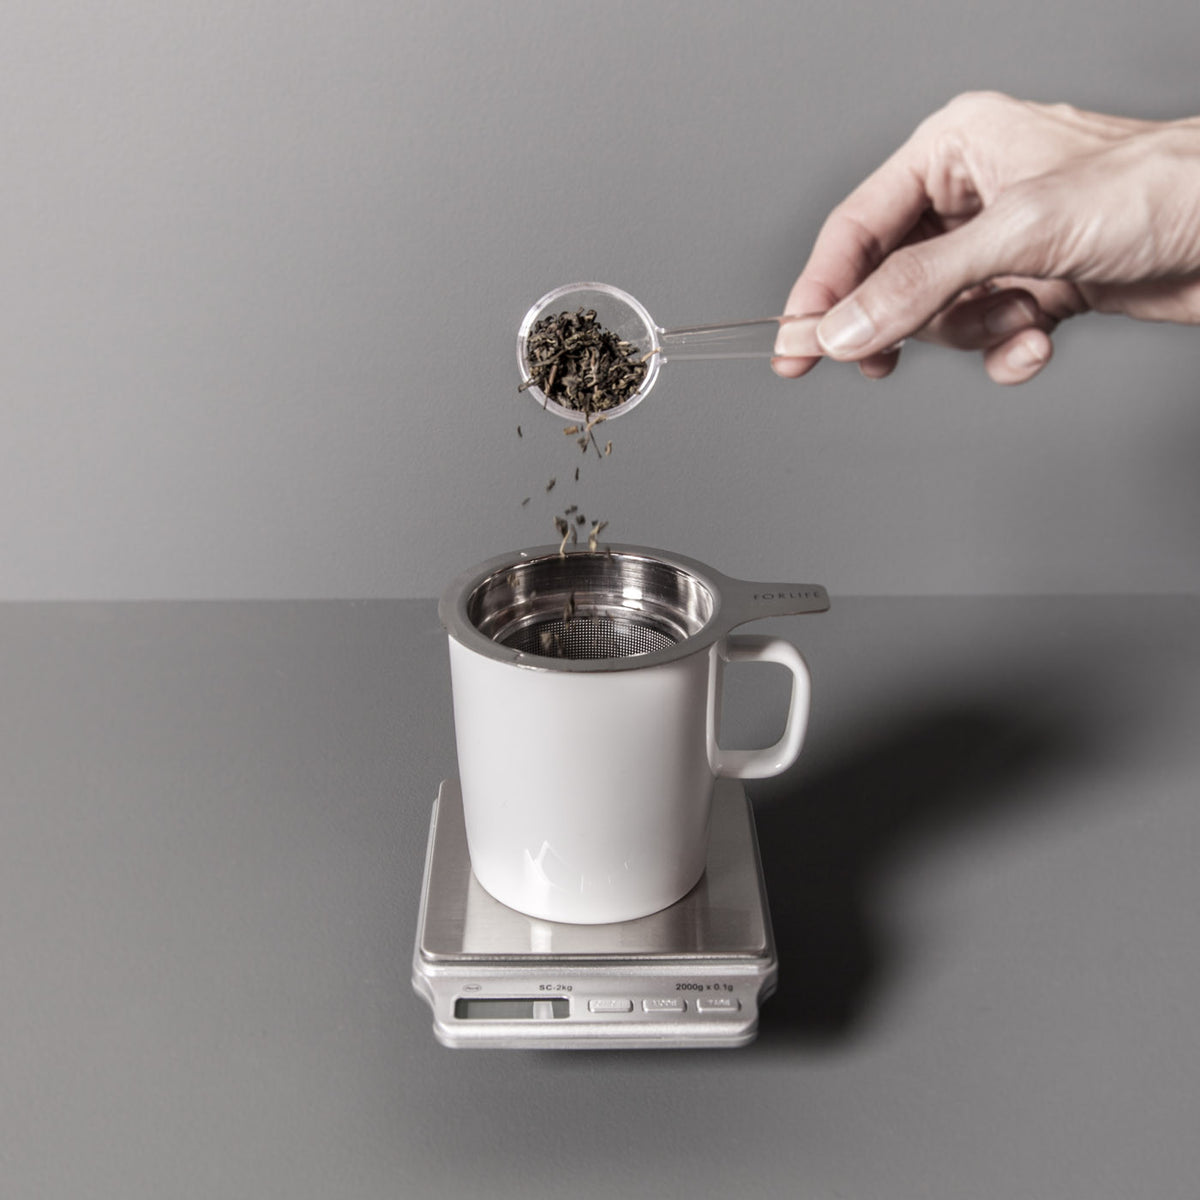 Precision Scale: Get The Same Tea Flavor Every Time